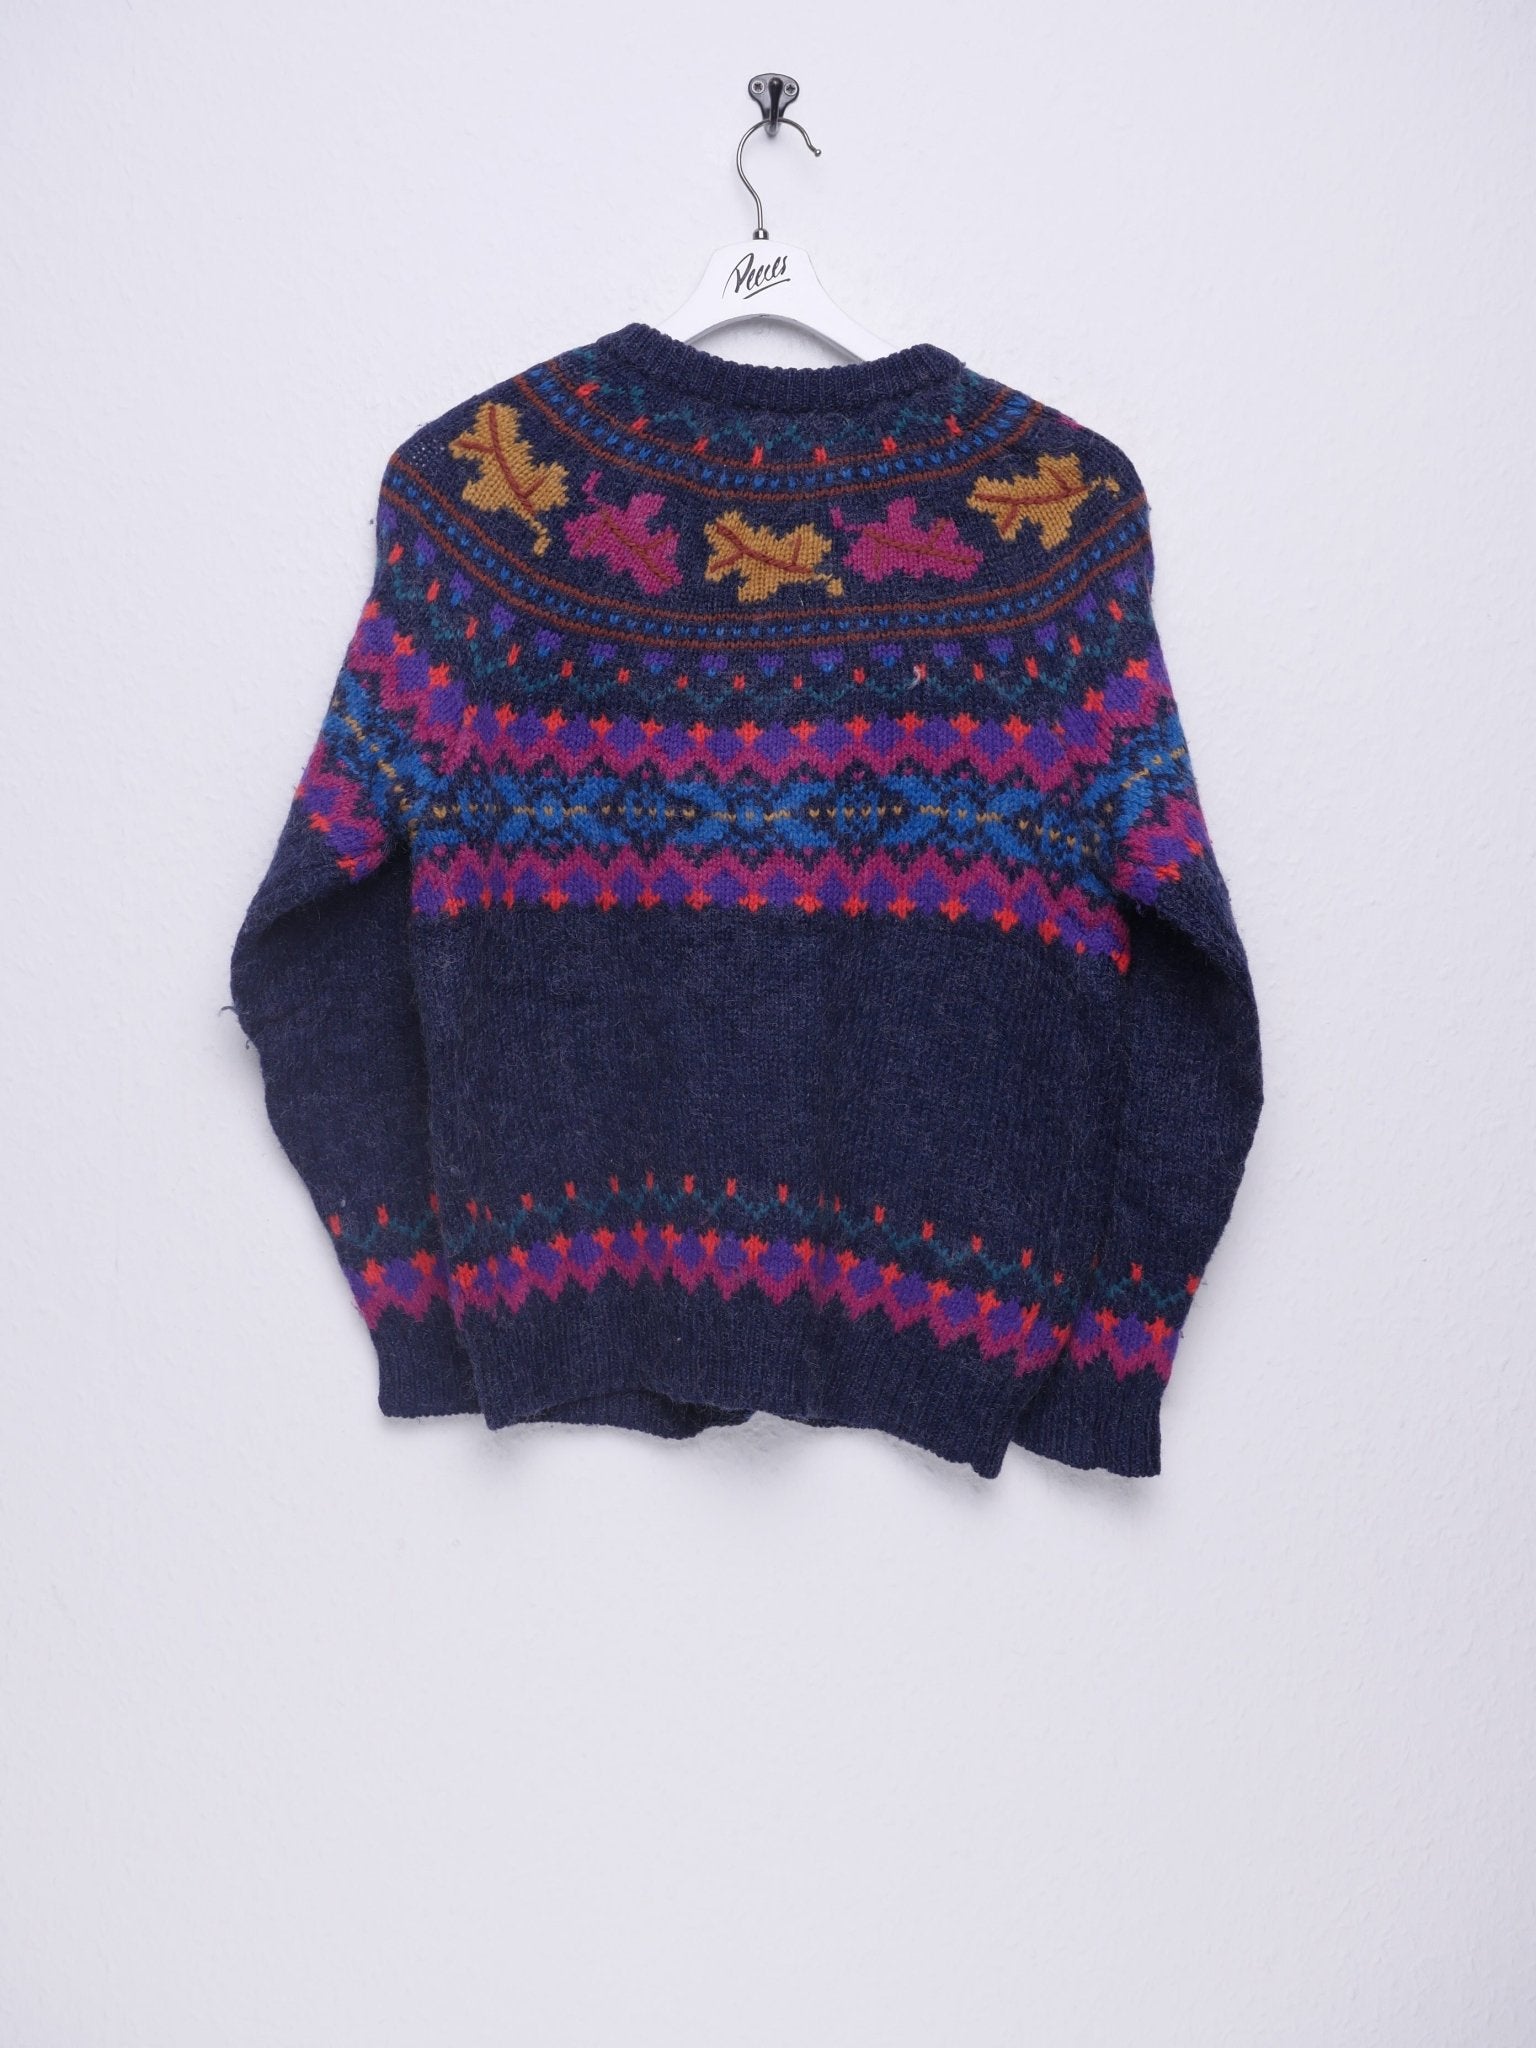 Vintage knitted colorful Cardigan Sweater - Peeces